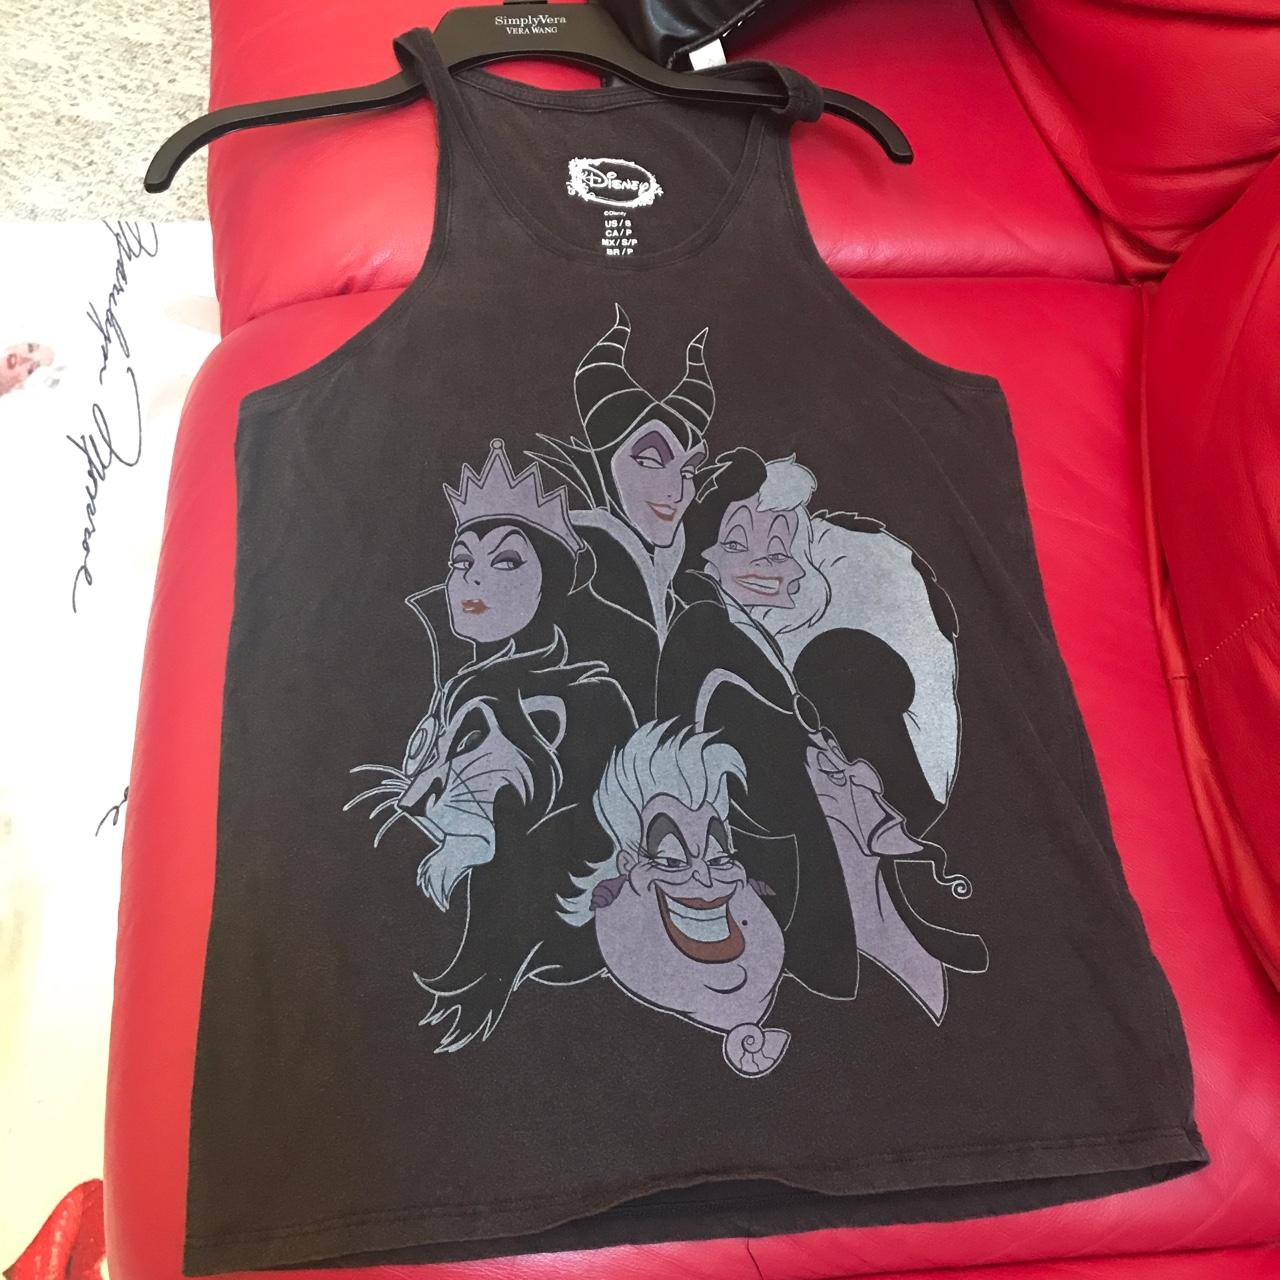 Disney tank top in size small, could probably fit - Depop